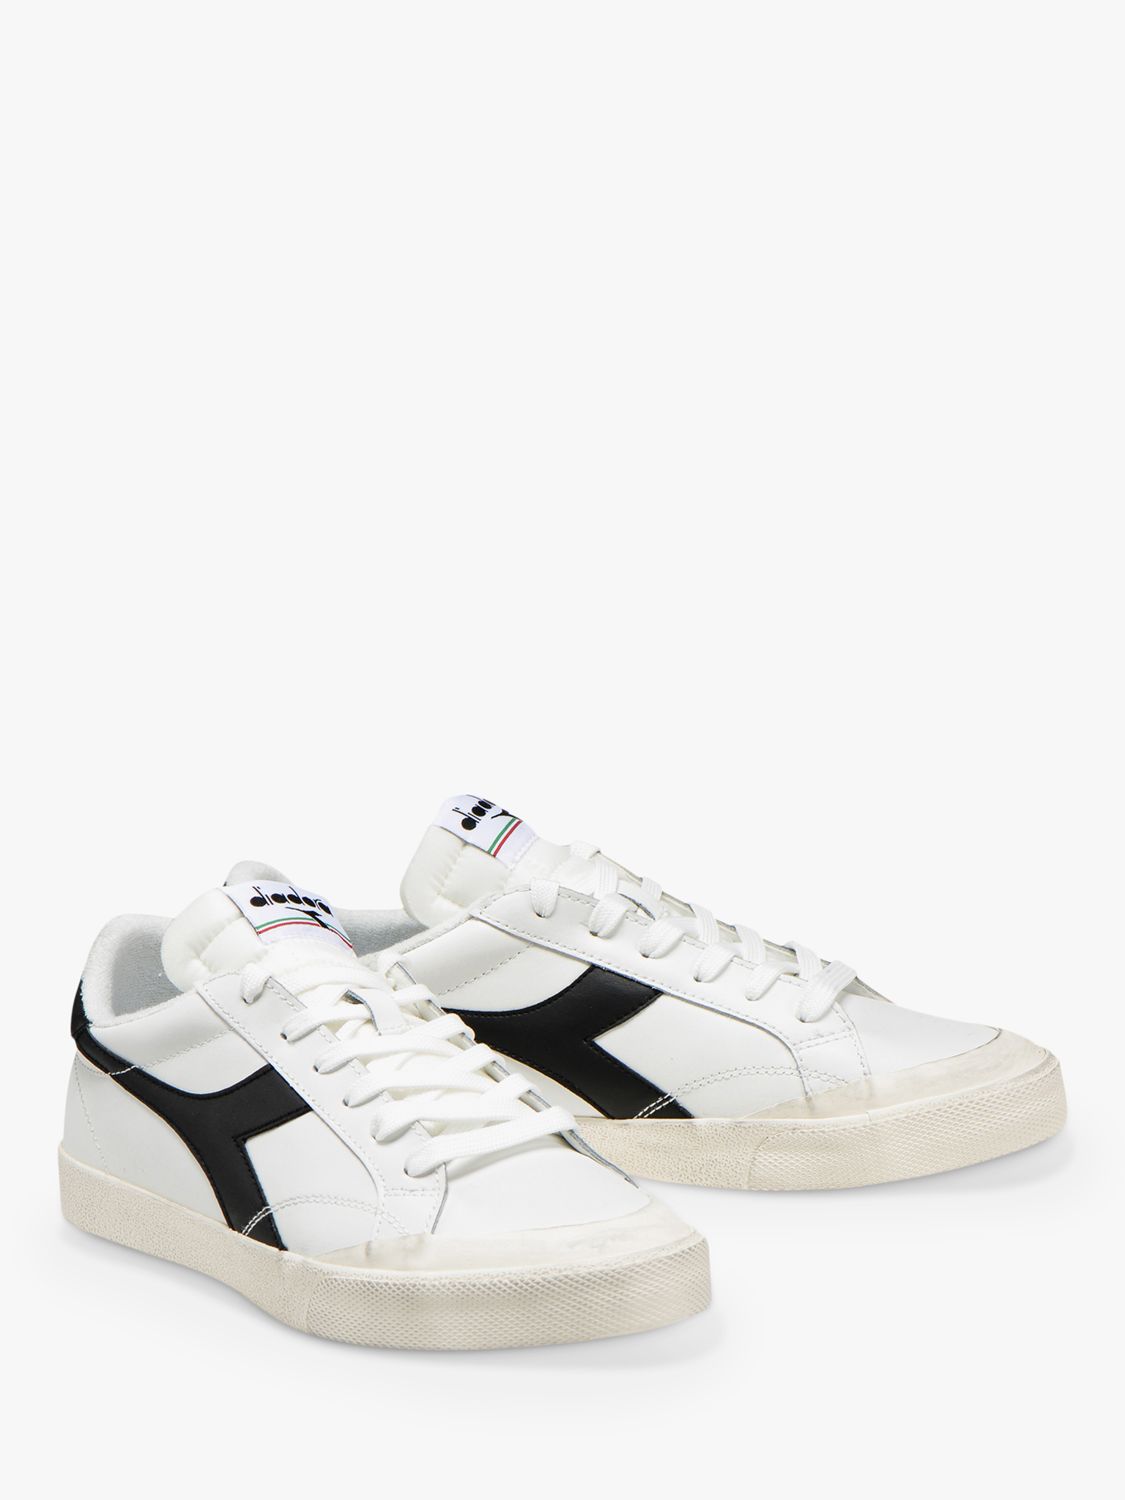 Diadora Melody Leather Dirty Trainers